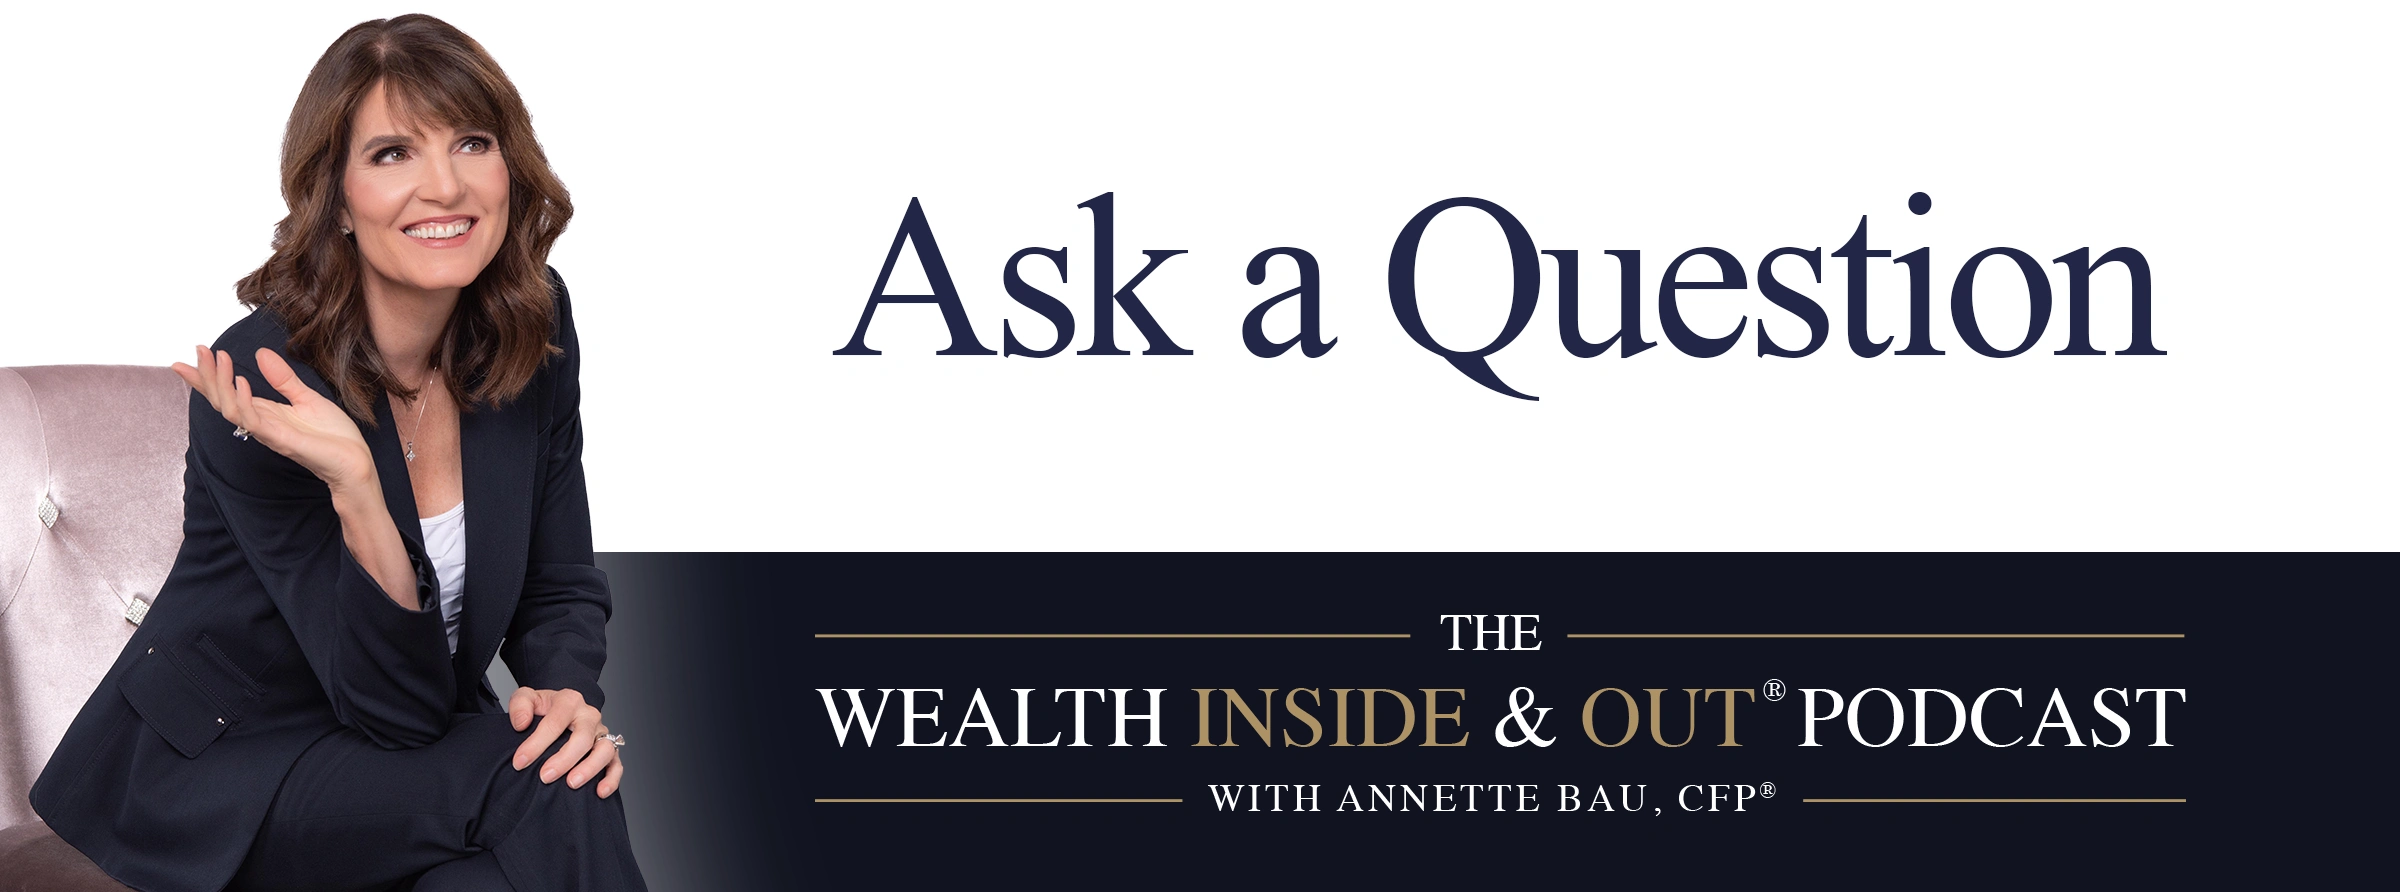 Wealth Inside and Out Ask a Question